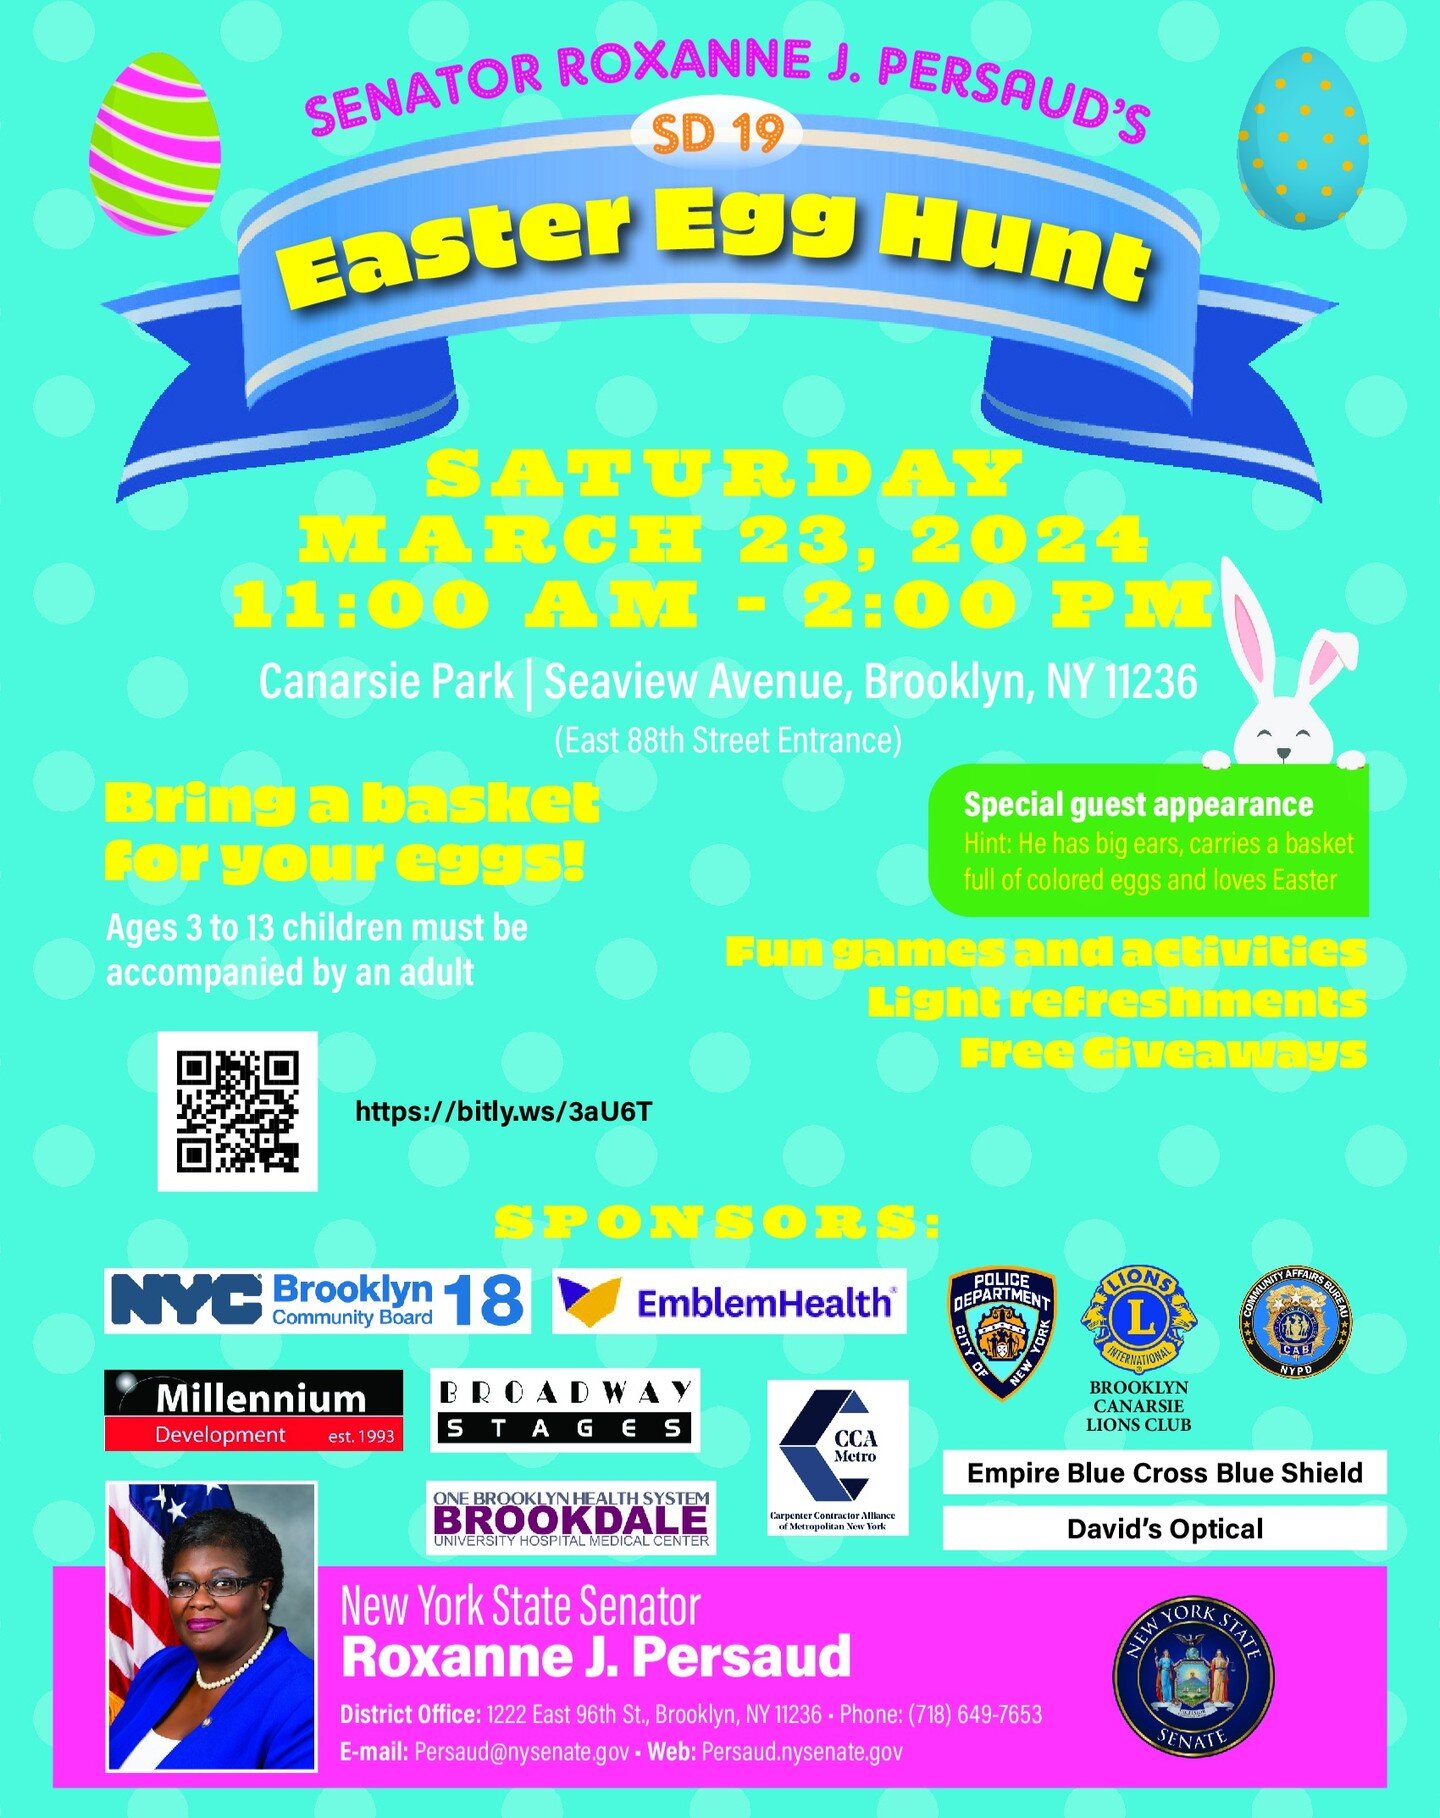 Hey LPOHMA Families, 

Come out to an Easter Egg Hunt this Saturday, March 23rd at 11AM, hosted by our esteemed supporter, New York Senator Roxanne J. Persaud. All are welcomed! Check out the flyer above for further details.